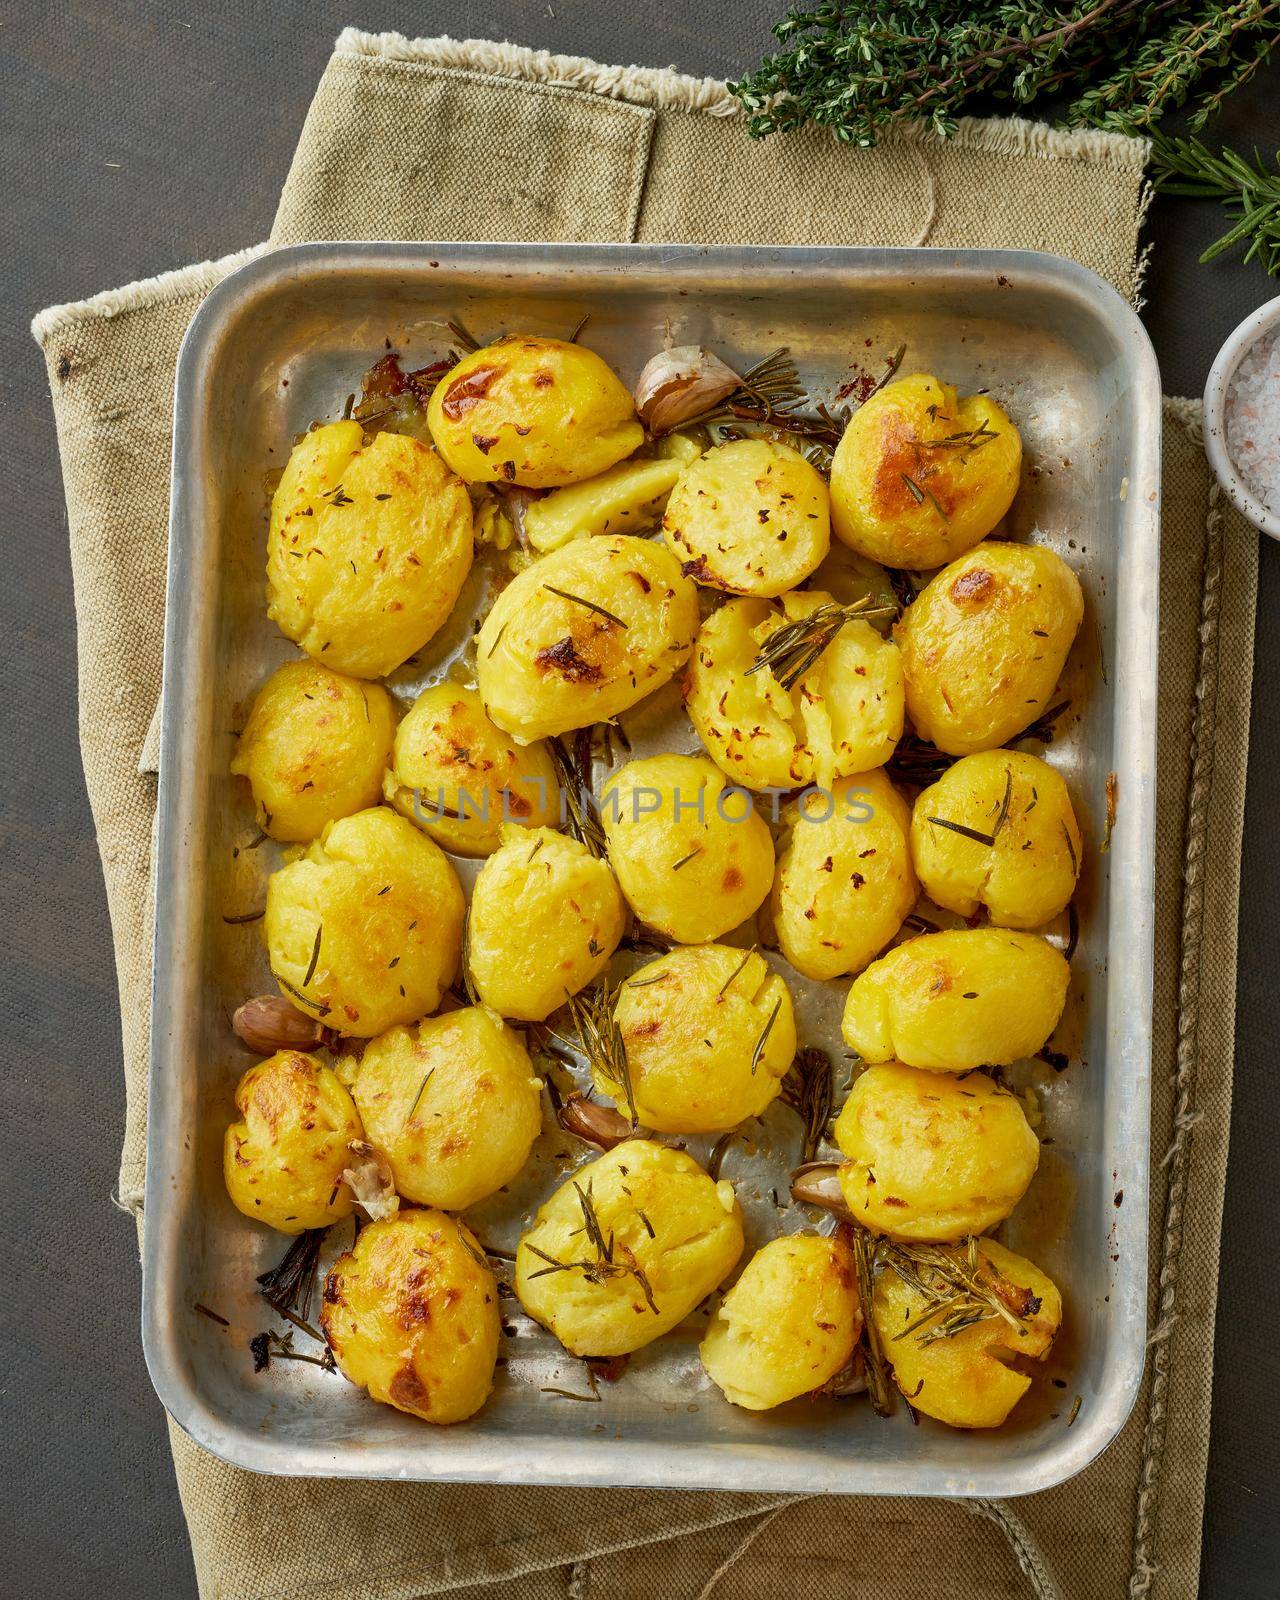 Oven baked whole crushed and crusty potato spuds with seasoning and herbs in metalic tray. Roasted smashed potatoes. Top view. Dark rustic table. Vertical